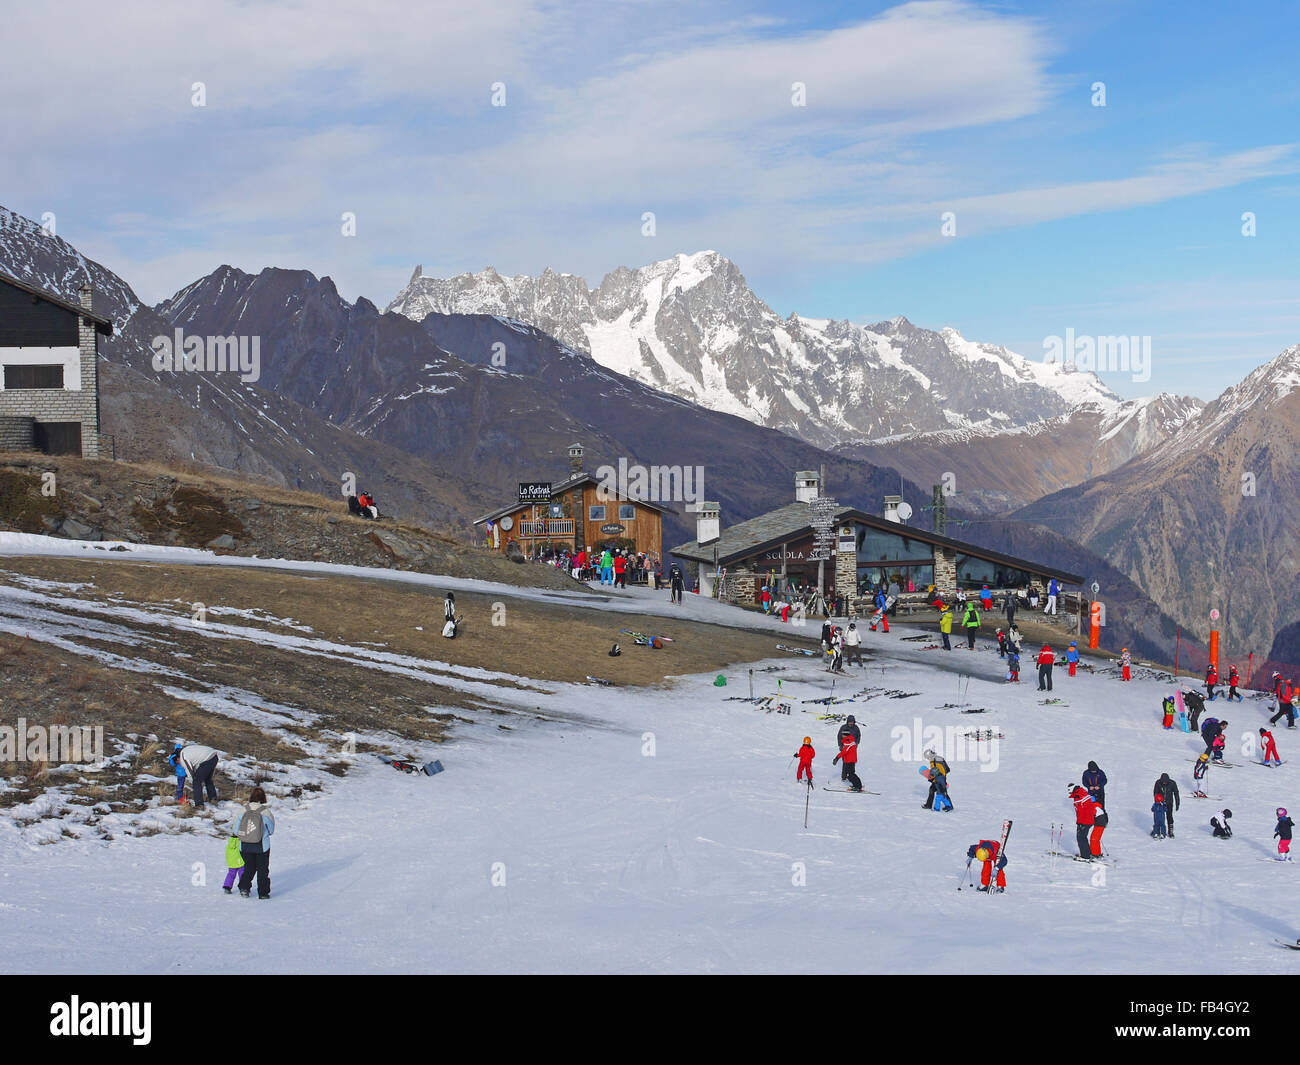 La Thuile Italy ski resort in December 2015 showing the extreme lack of snow in Europe for wintersports at that time. Stock Photo